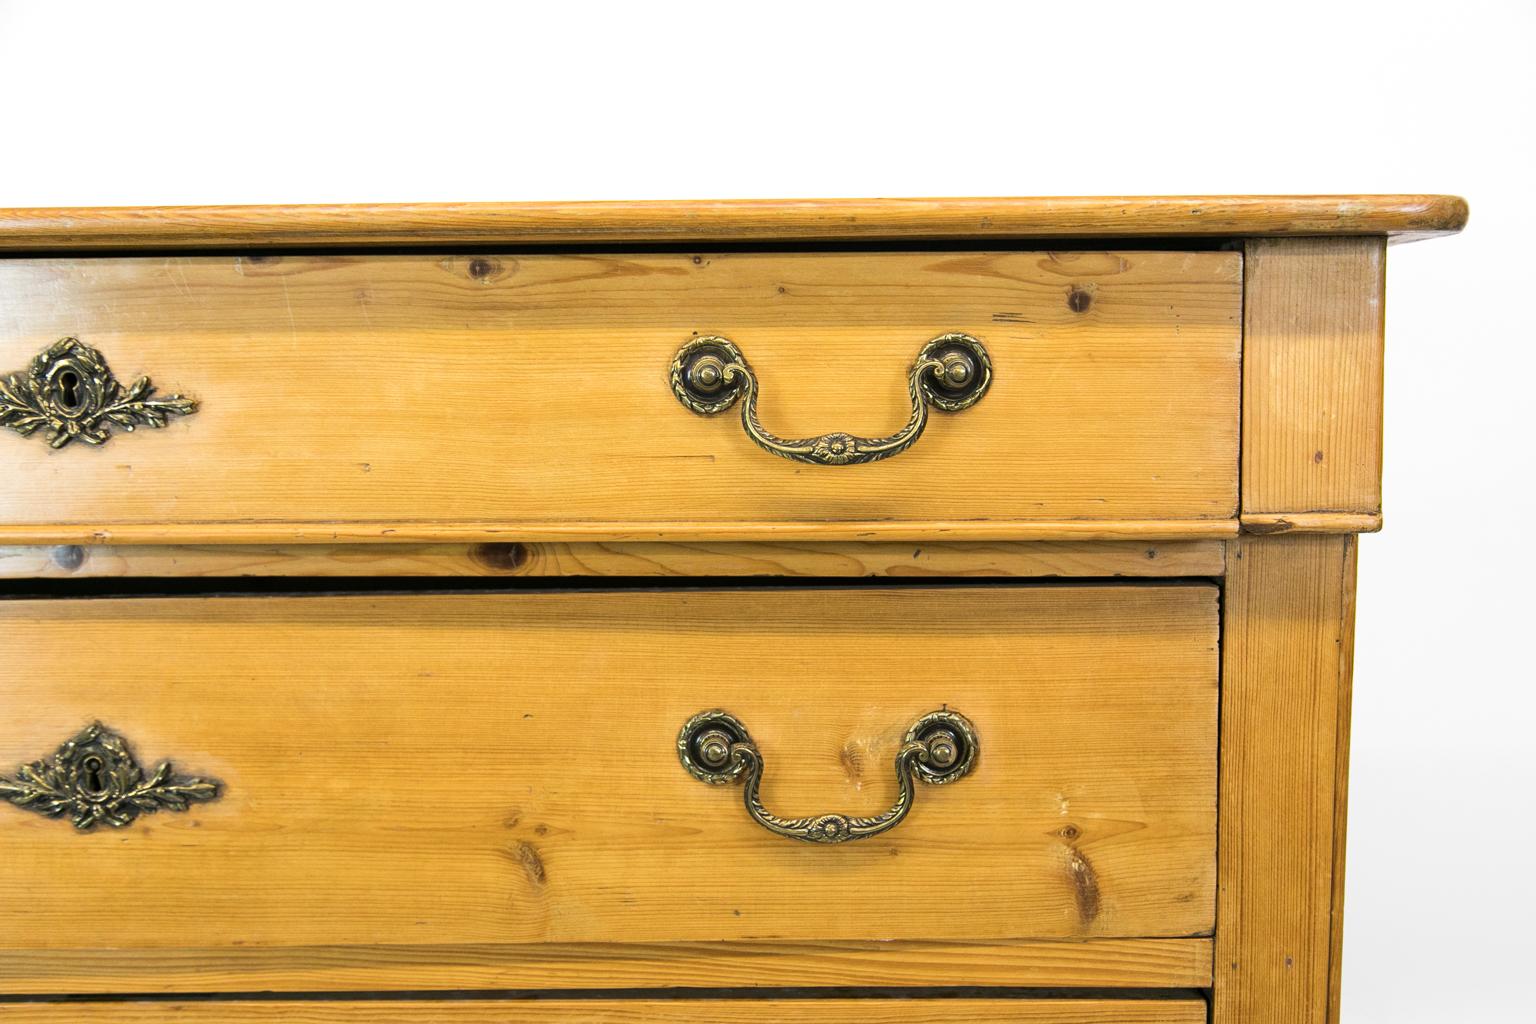 French pine four-drawer chest has the original working lock and key, and the top edge has bull nose shaping. The top drawer breaks out slightly over the lower three drawers. The base is a solid 4 1/2” plinth.